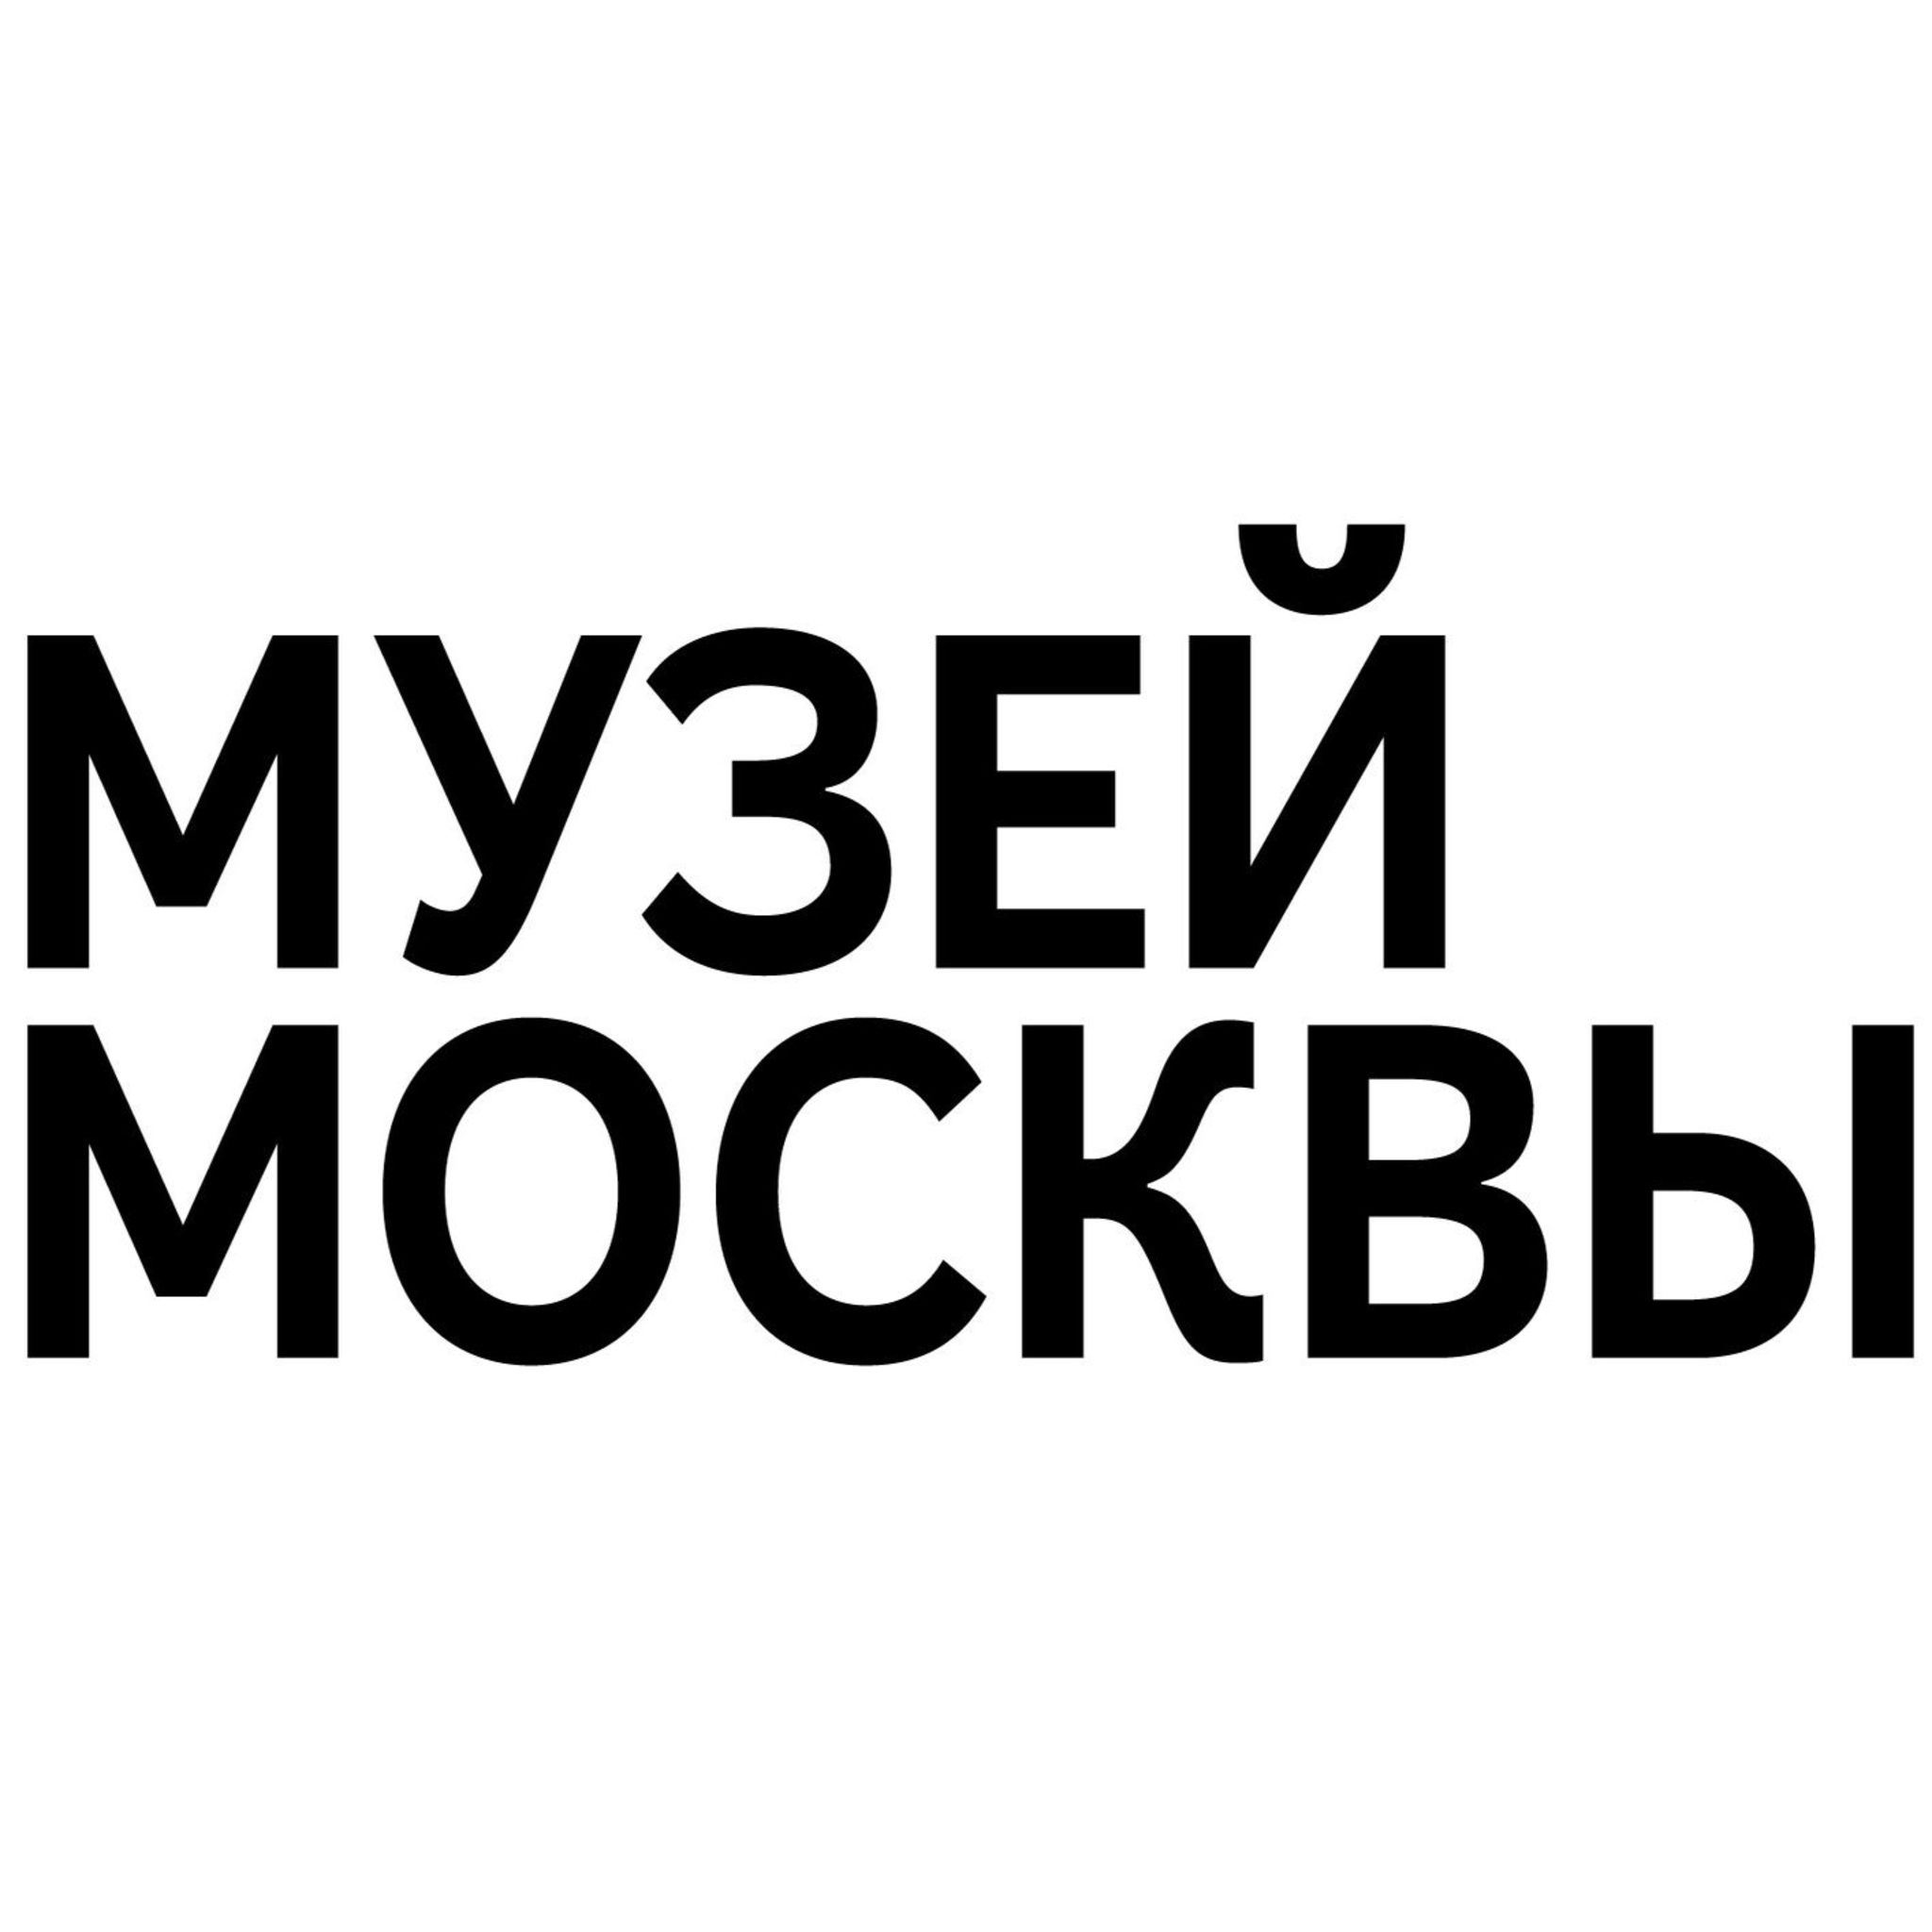 Tickets to the Museum of Moscow